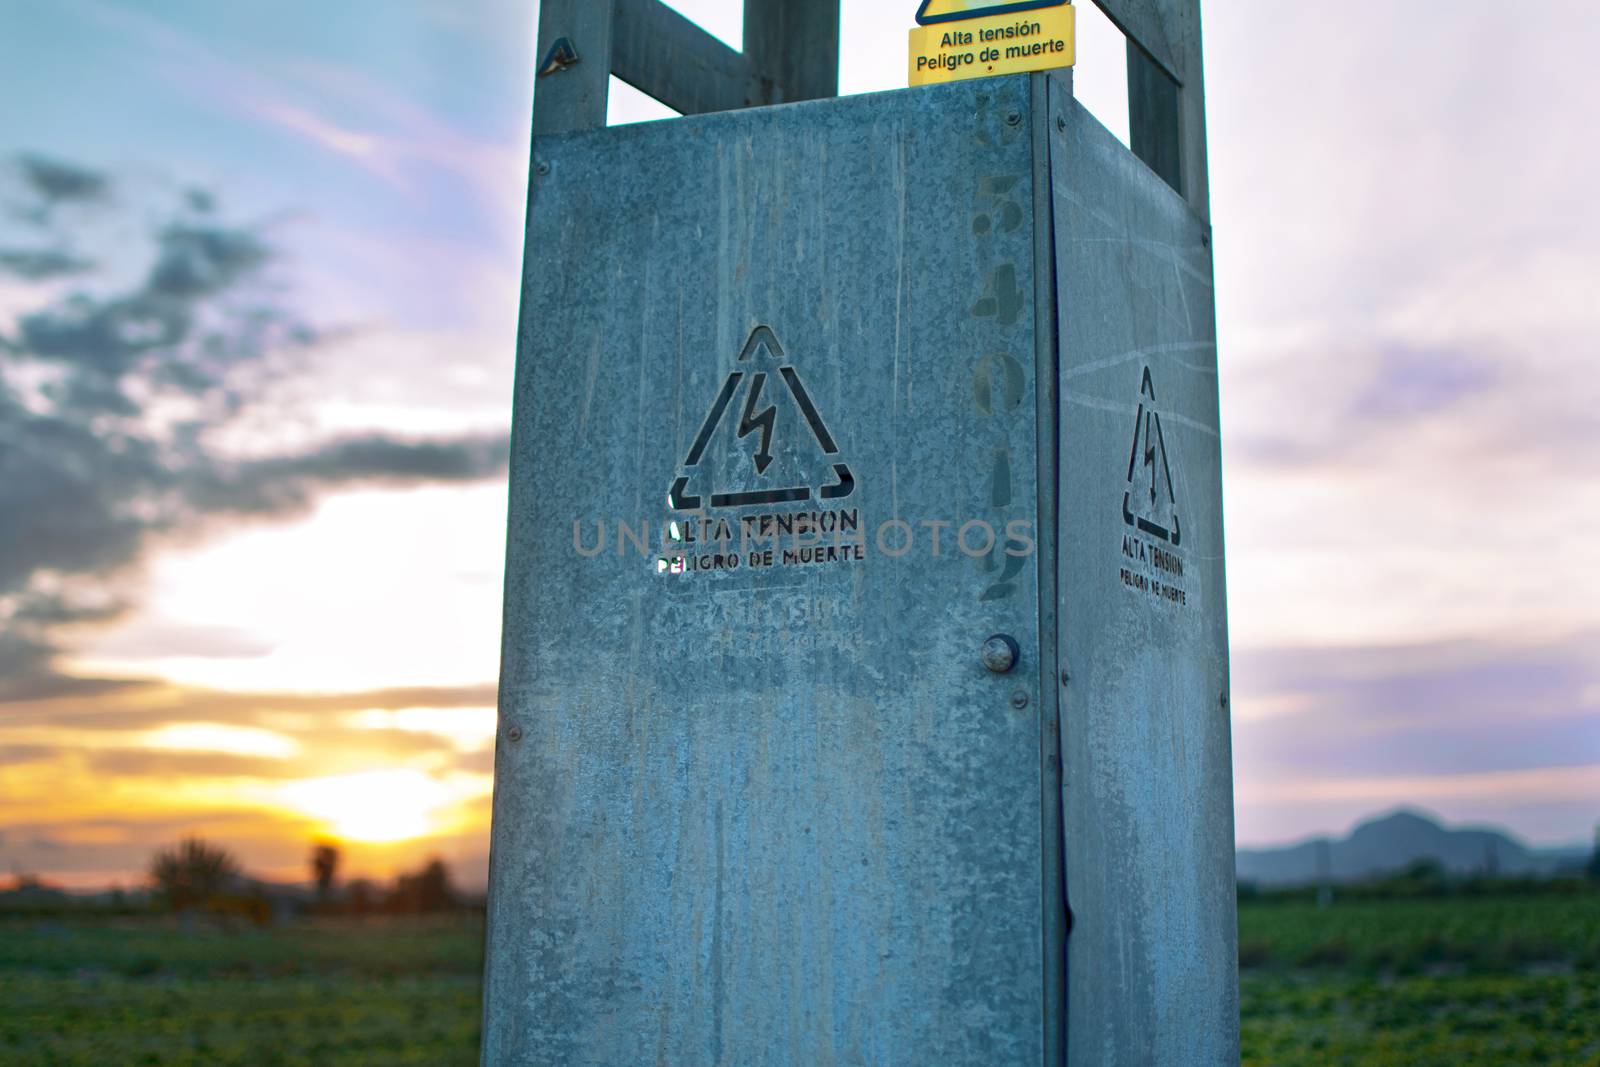 High voltate sign in the base of an electric tower at sunset. Cell tower, electricity, cables. Written "high voltate, death danger" in the text. by worledit